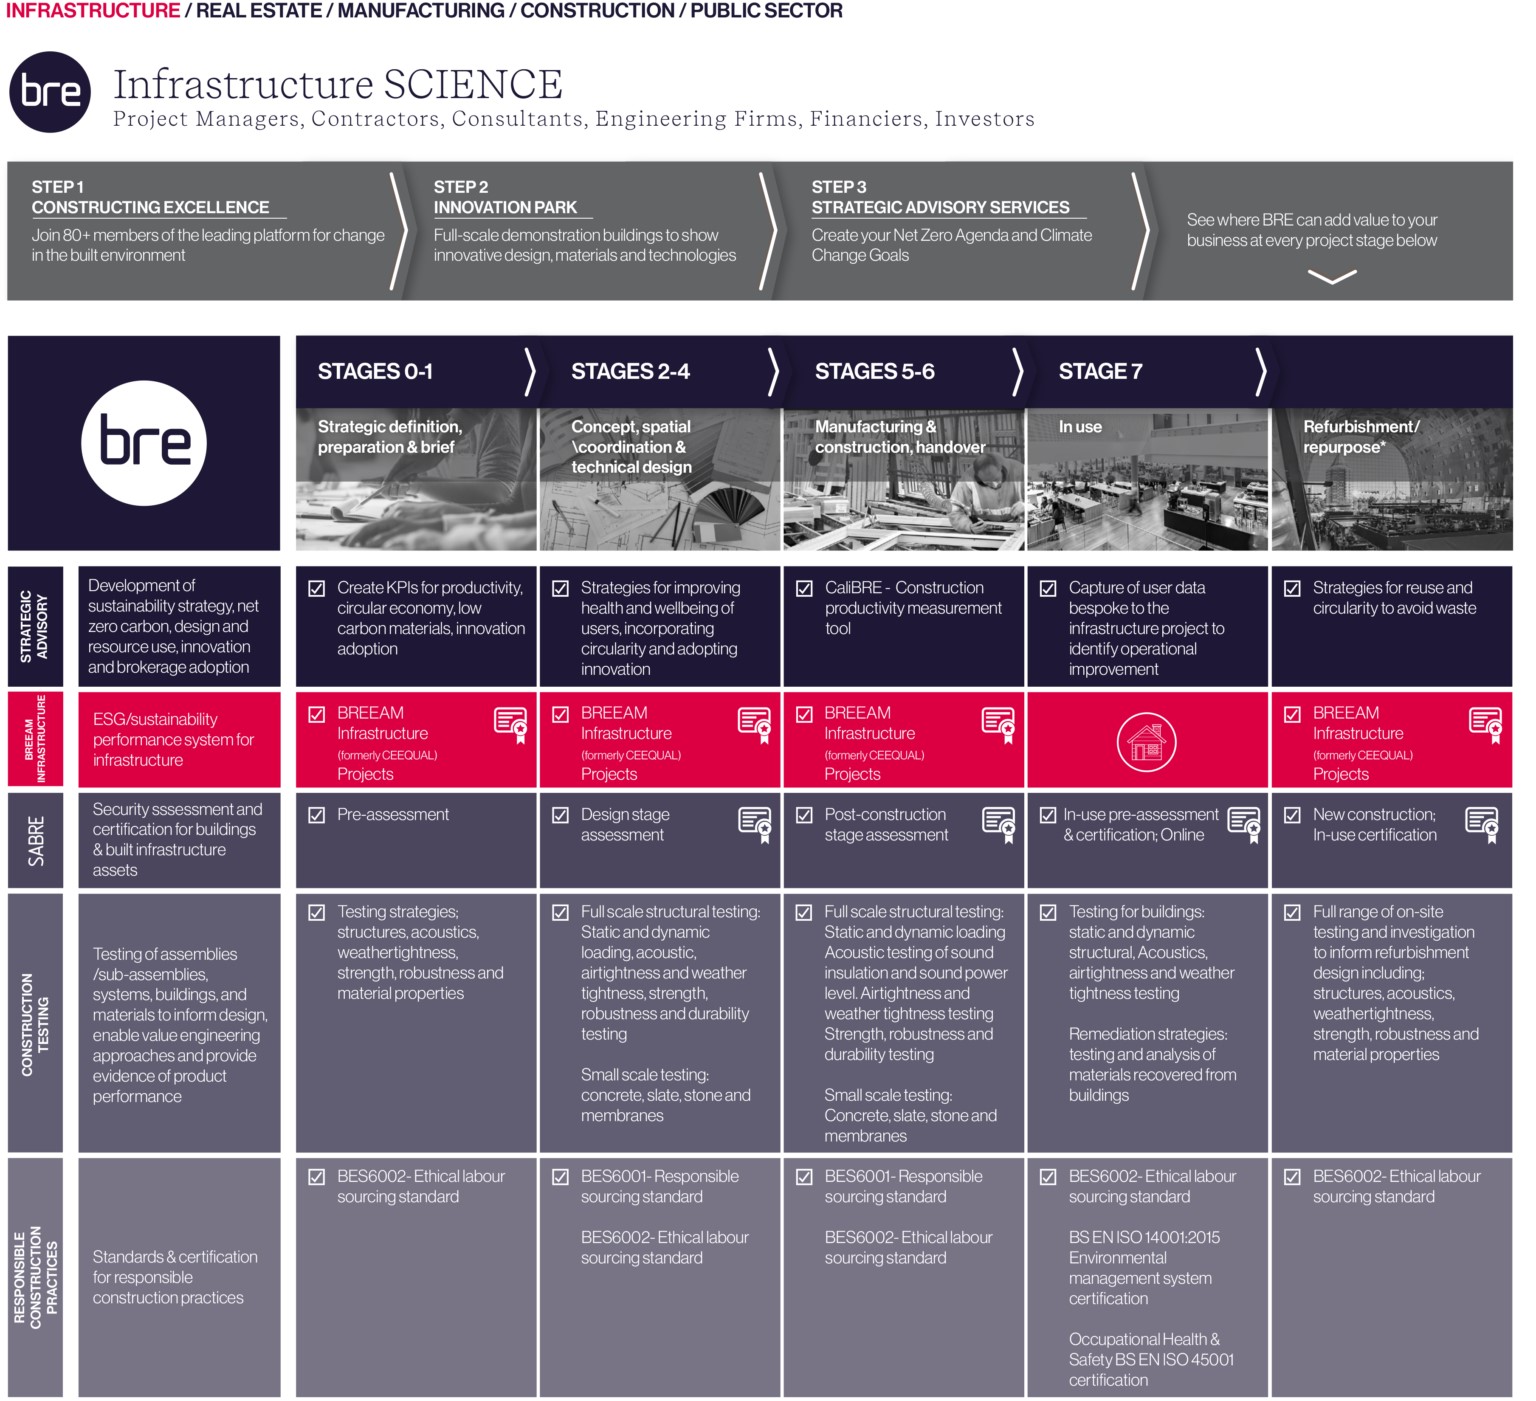 BRE’s products and services for infrastructure